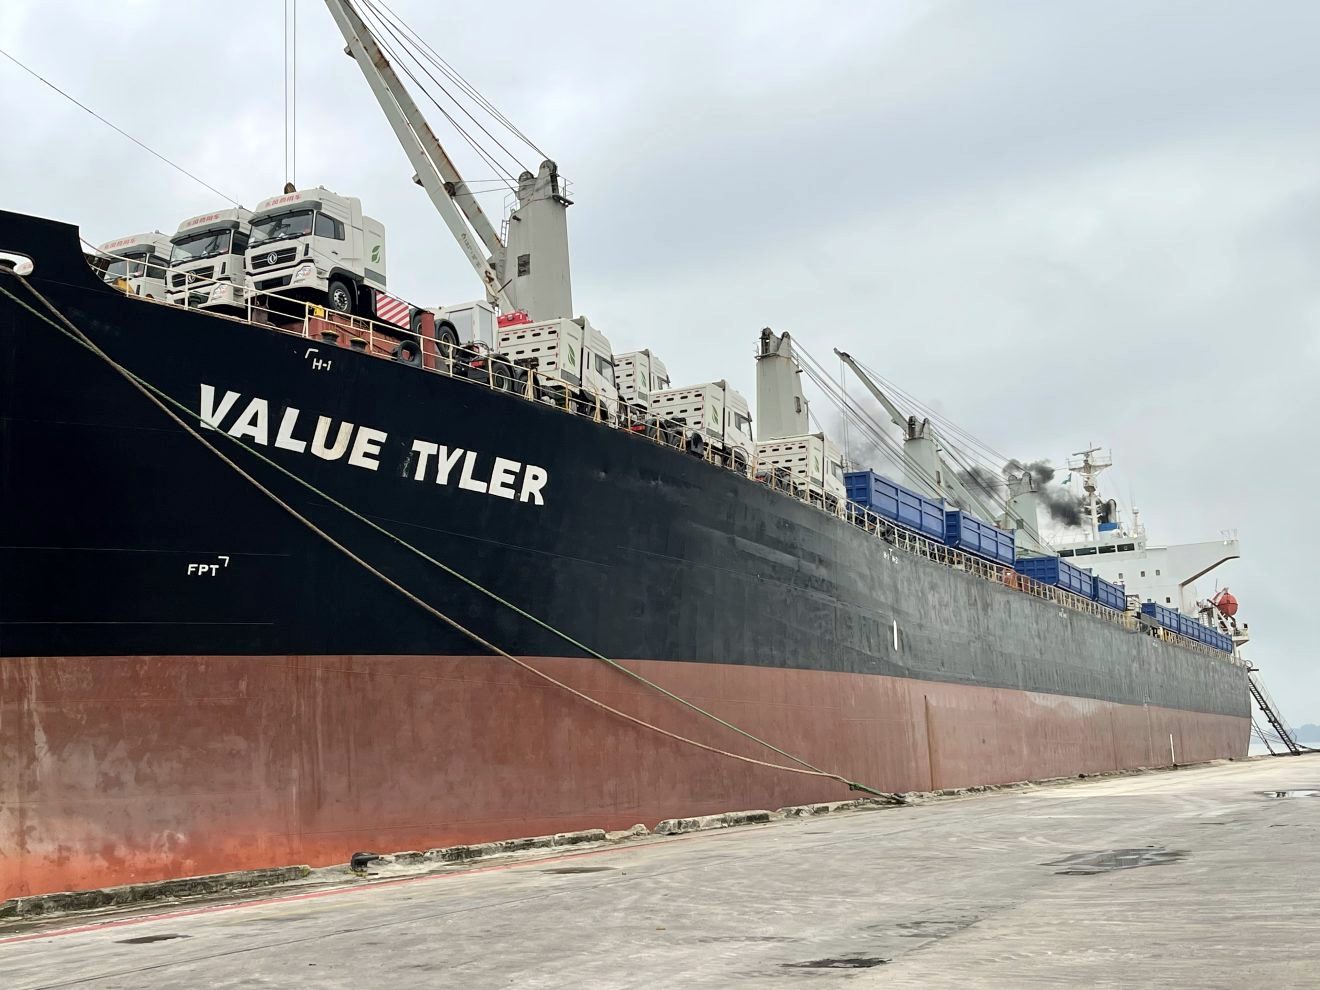 The vessel that berthed at Calabar Port